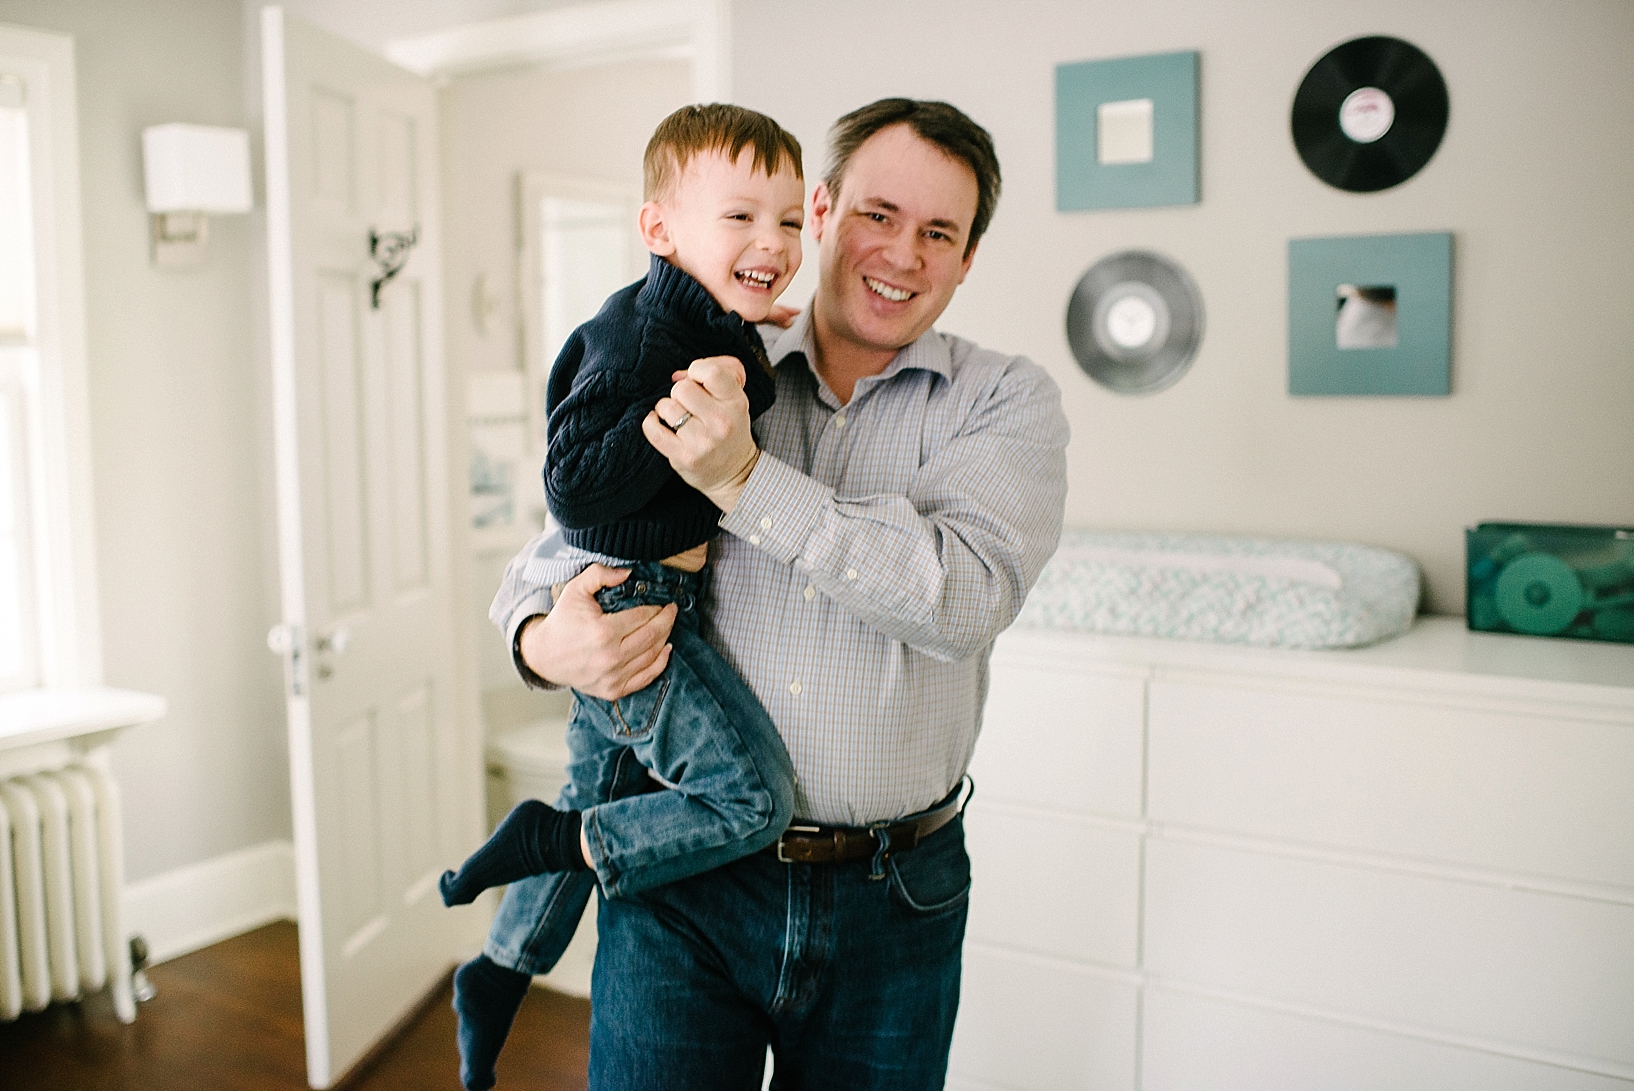 dad in plaid button down shirt holding son in arms dancing in bedroom